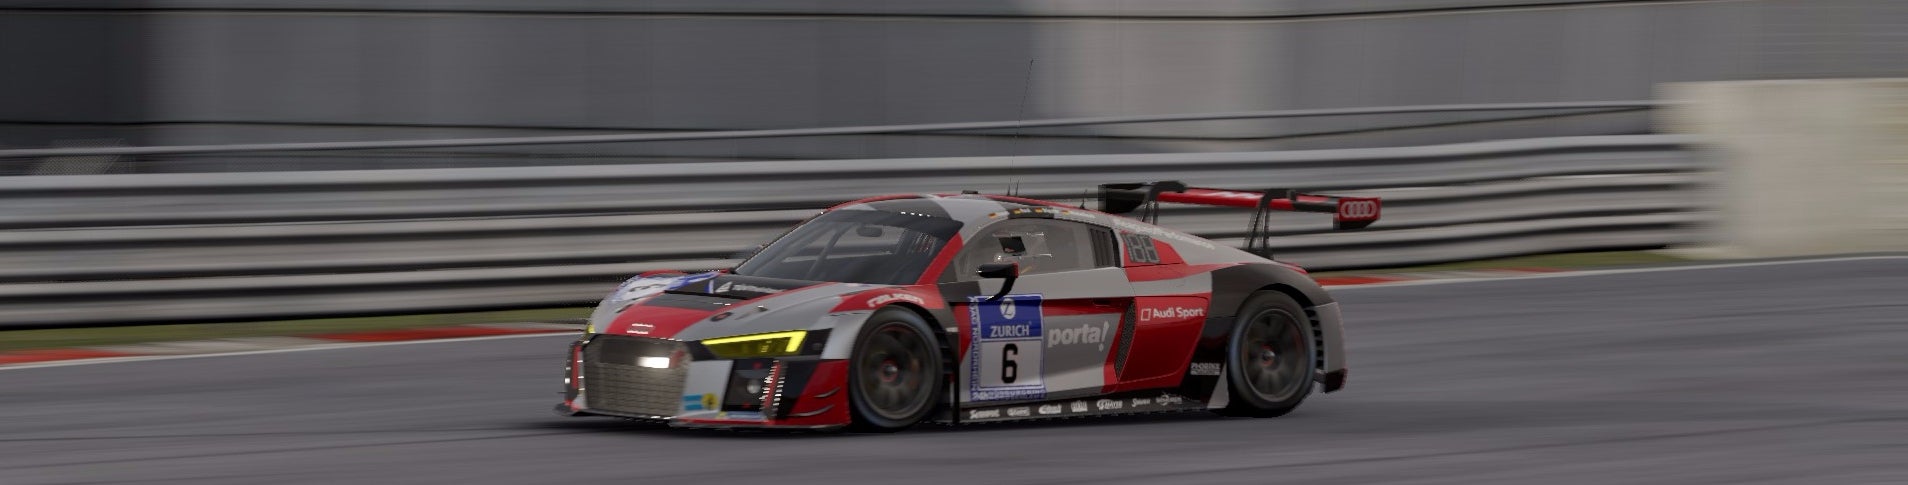 Image for Project Cars 2 sets new standards for the racing genre